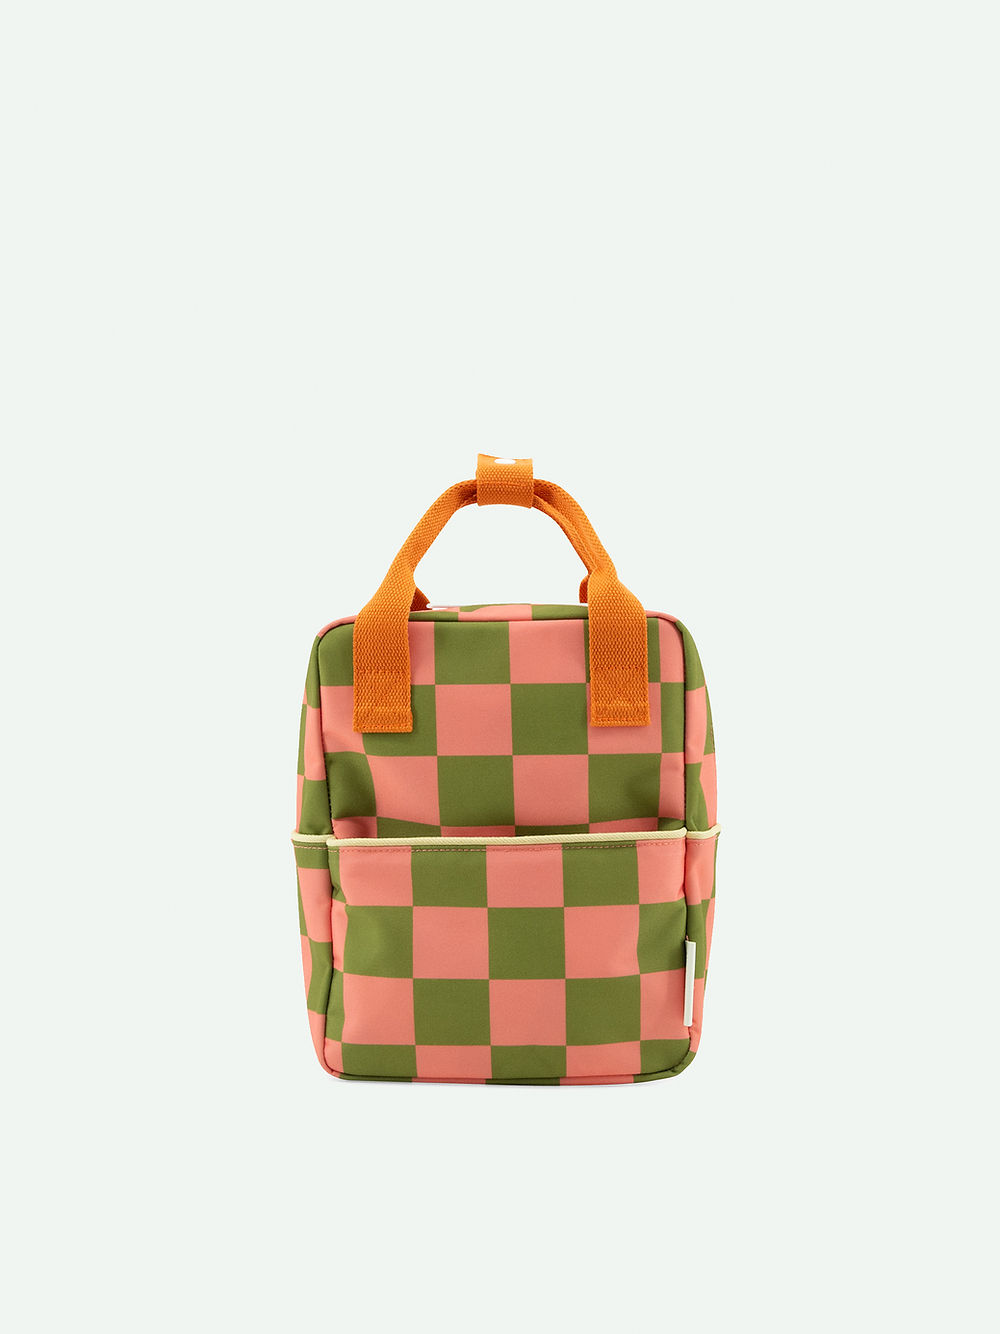 Rucsac MINI Farmhouse Checkerboard Sticky Lemon - Sprout Green/Flower Pink